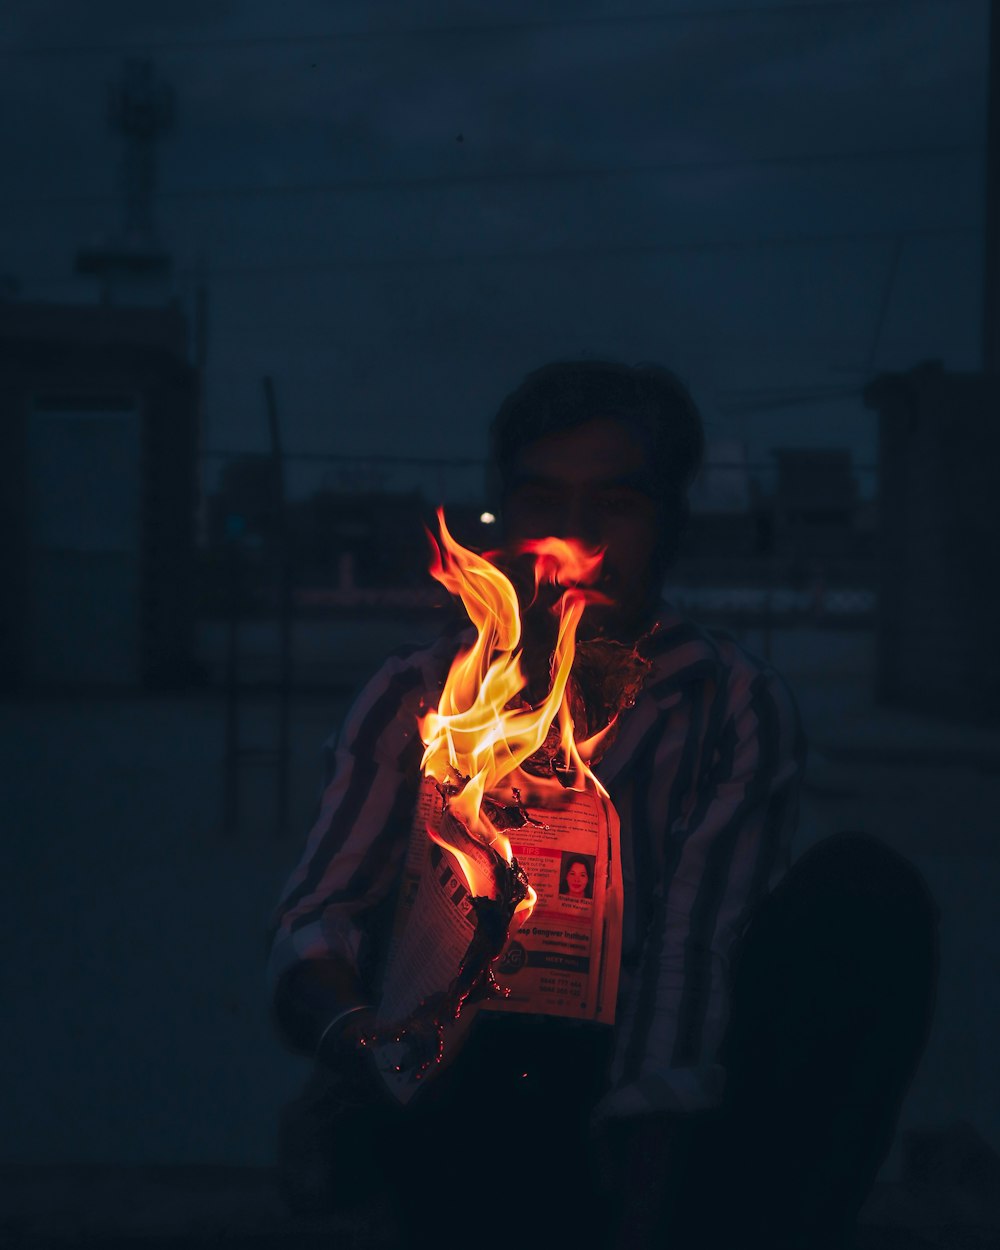 man in red jacket holding fire